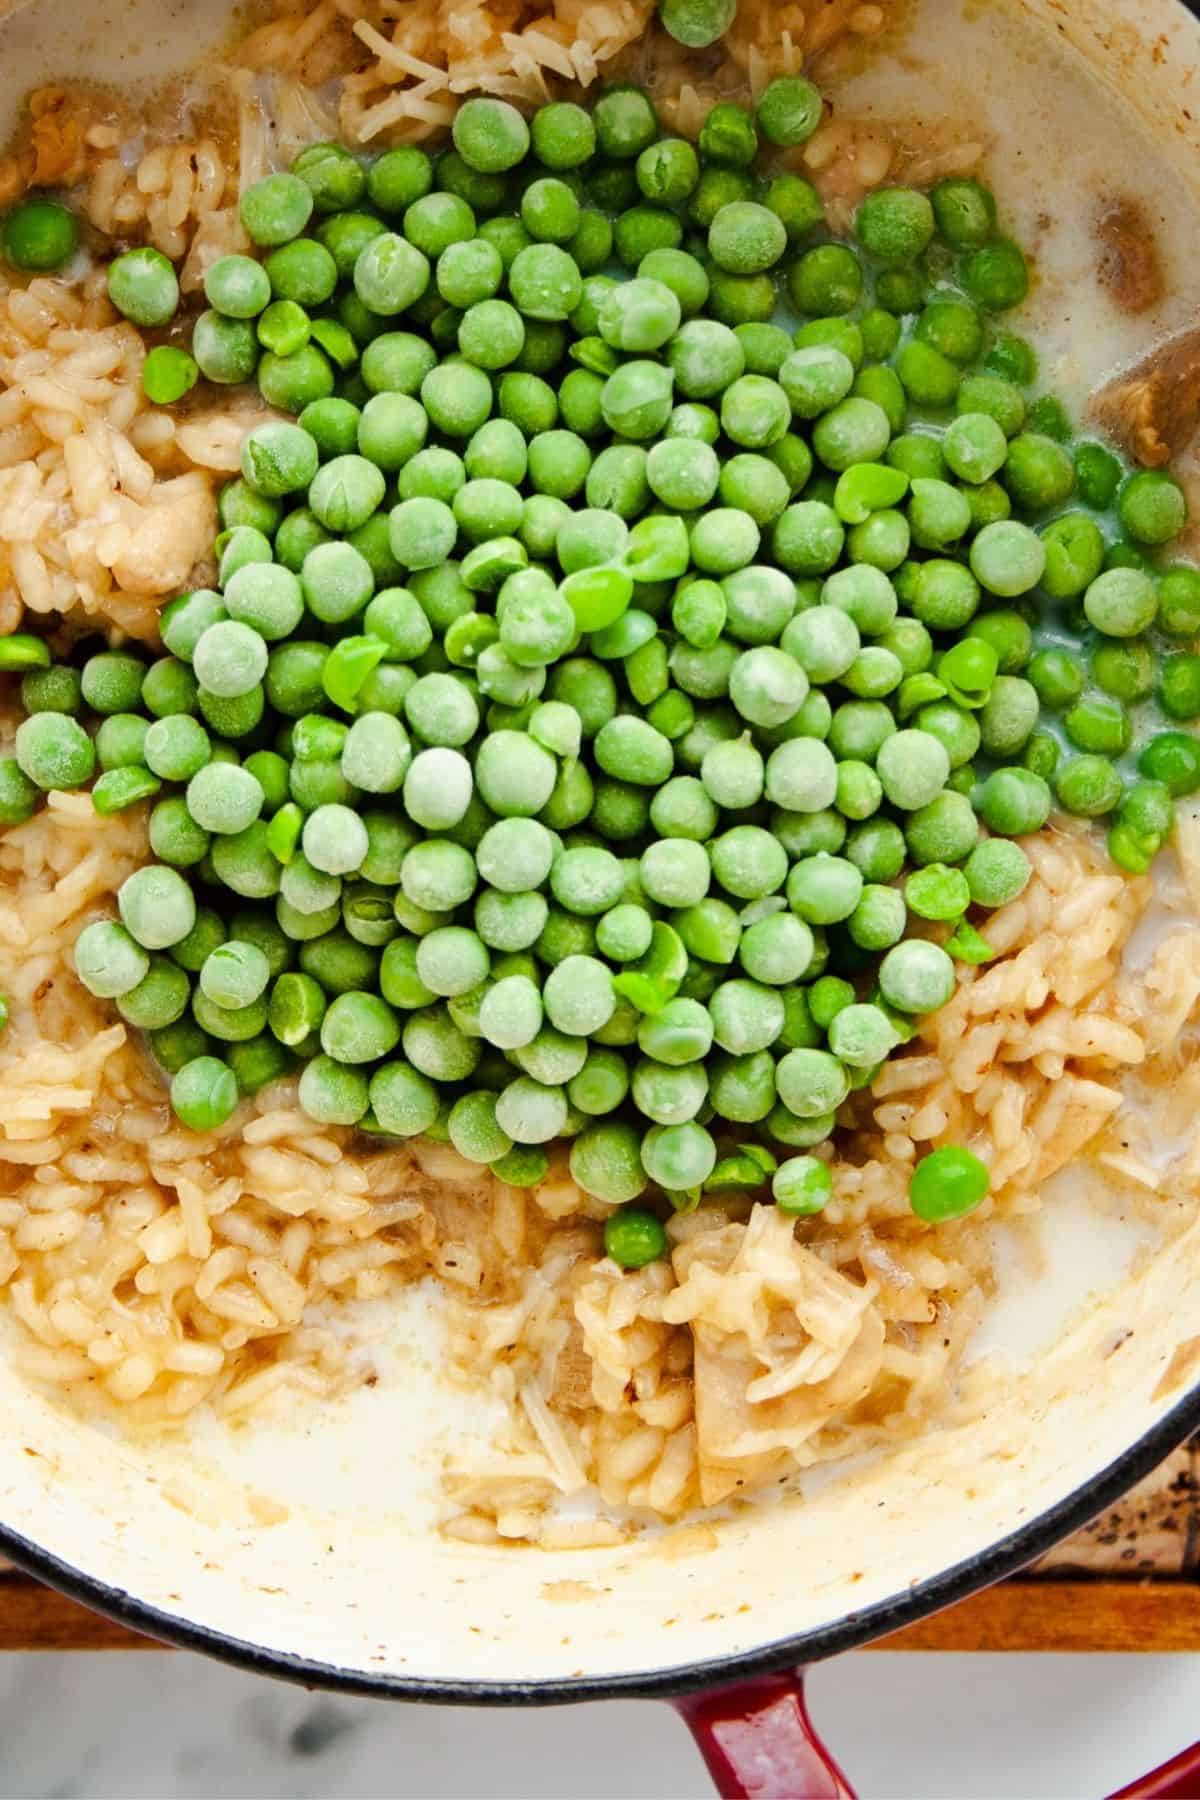 Frozen peas added to the risotto